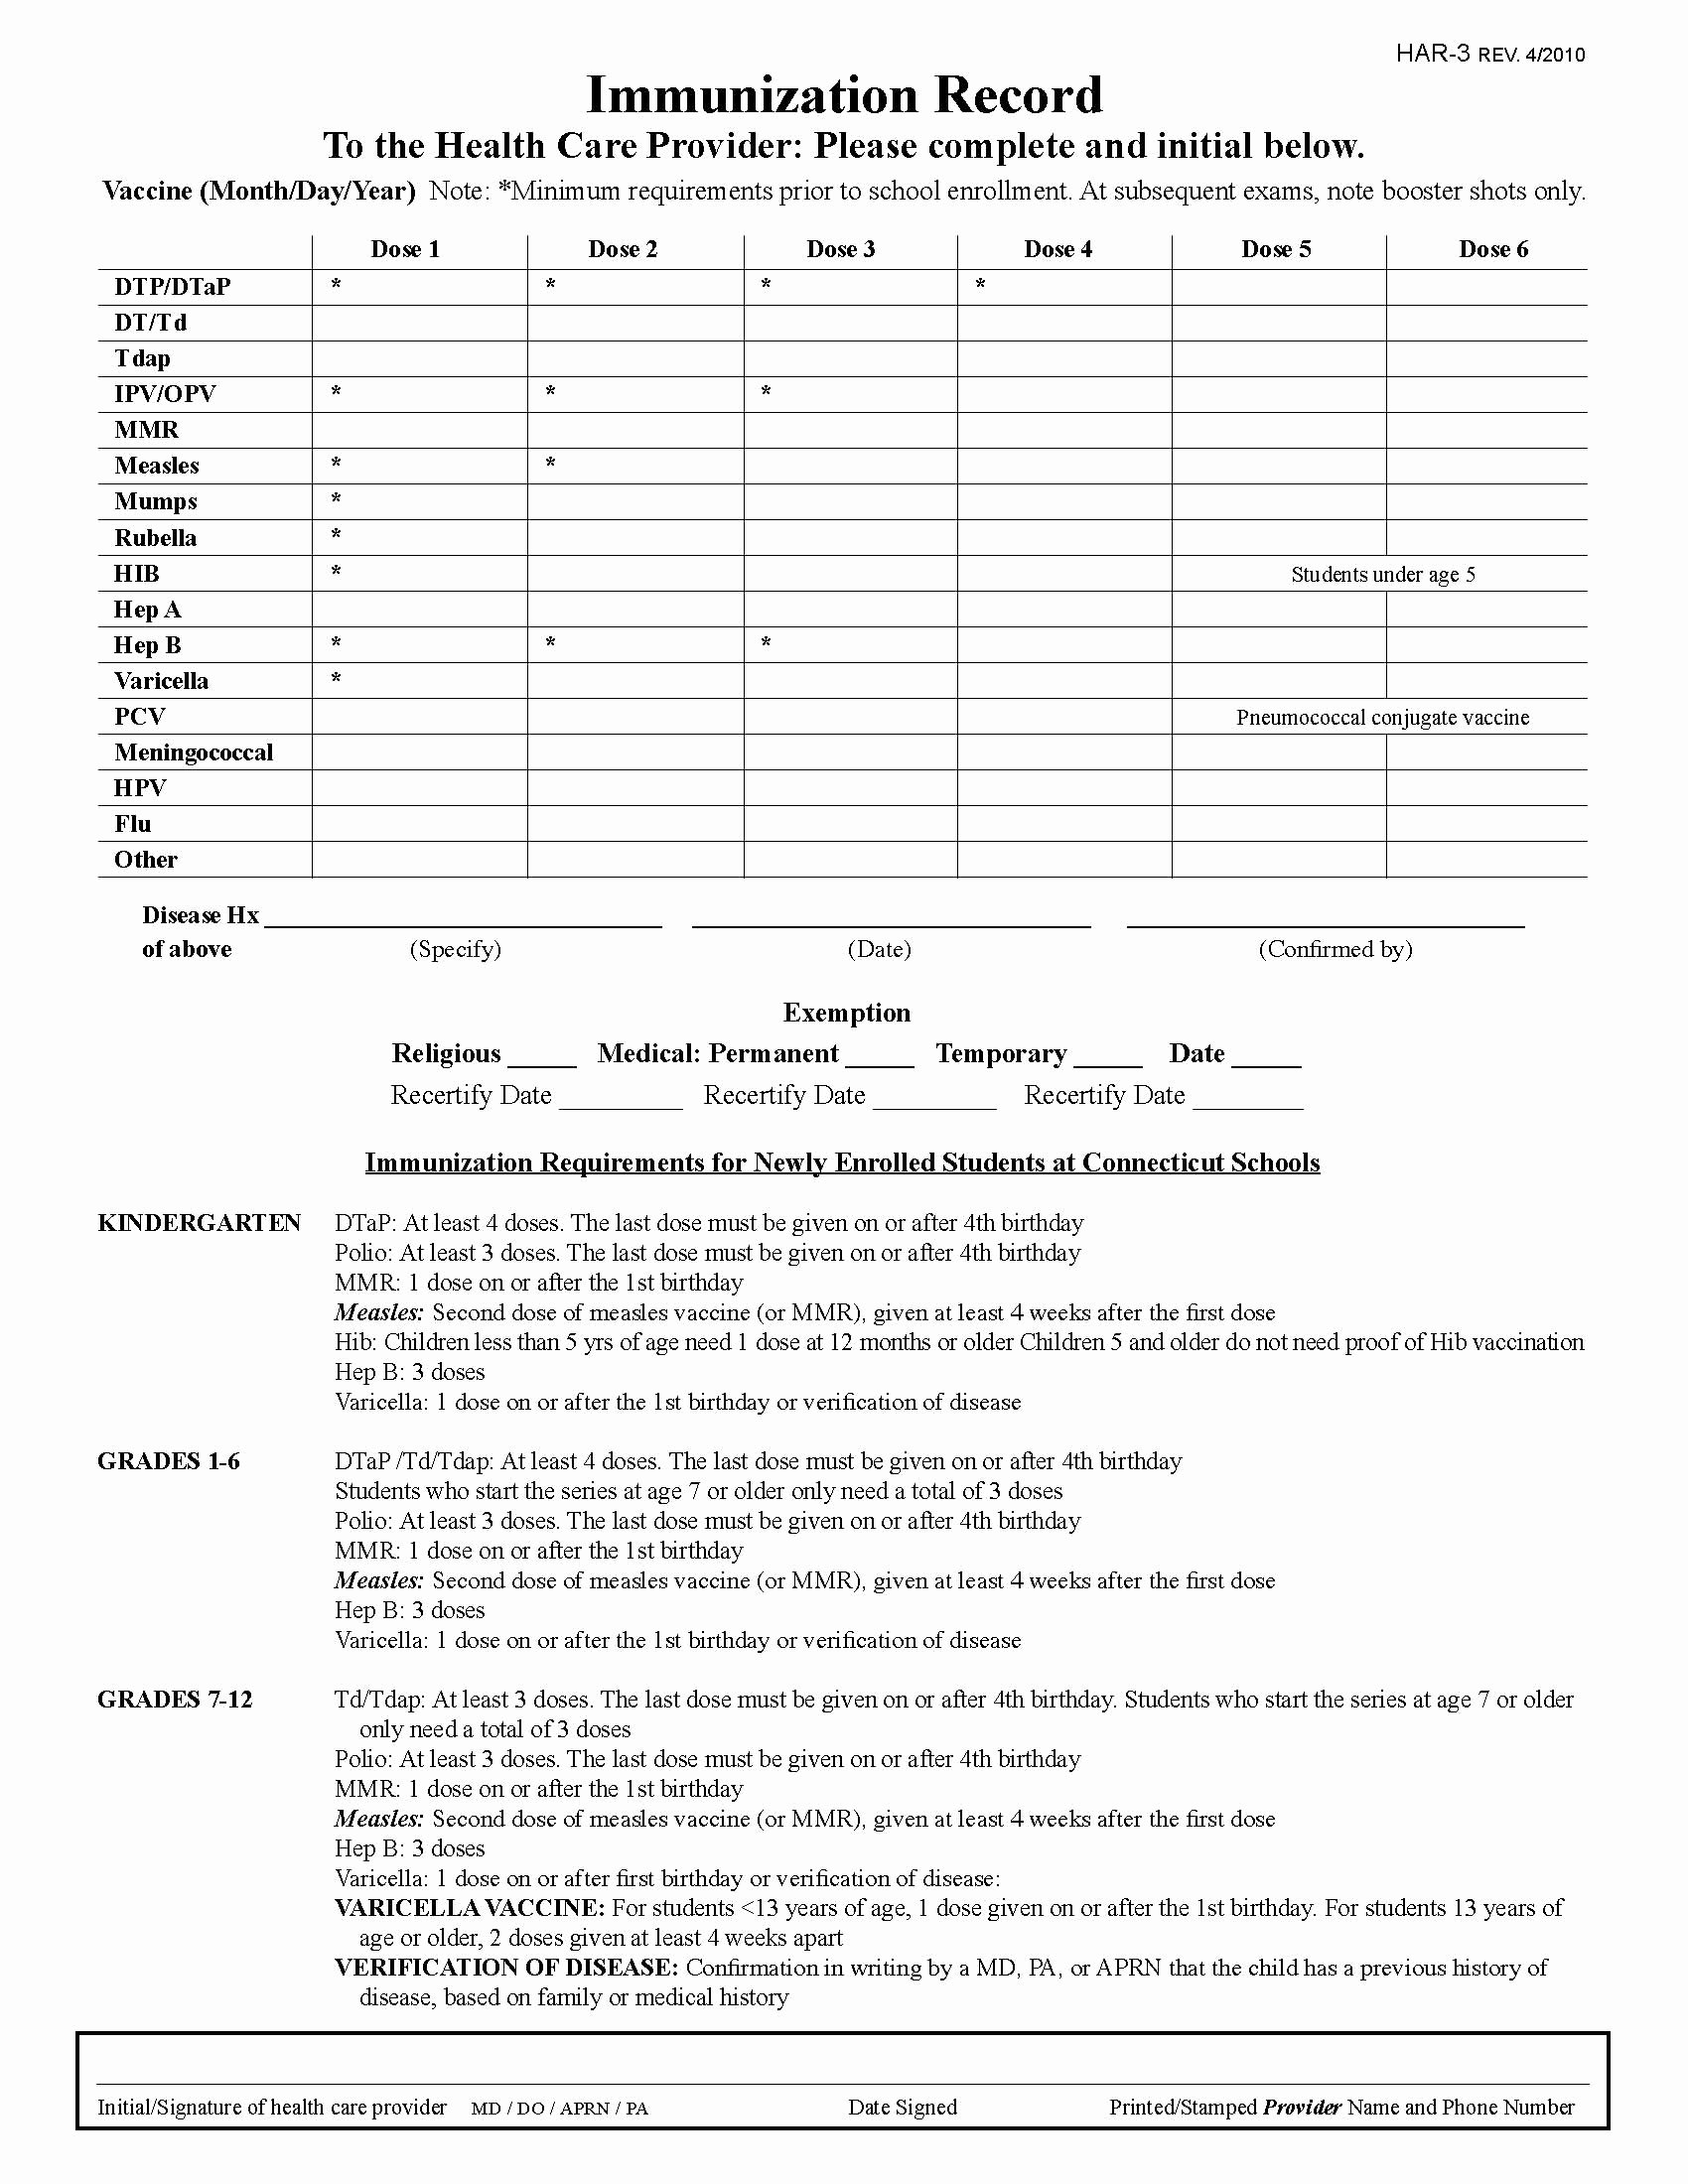 Physical Examination form Template Inspirational Physical Examination form West Haven Board Of Education